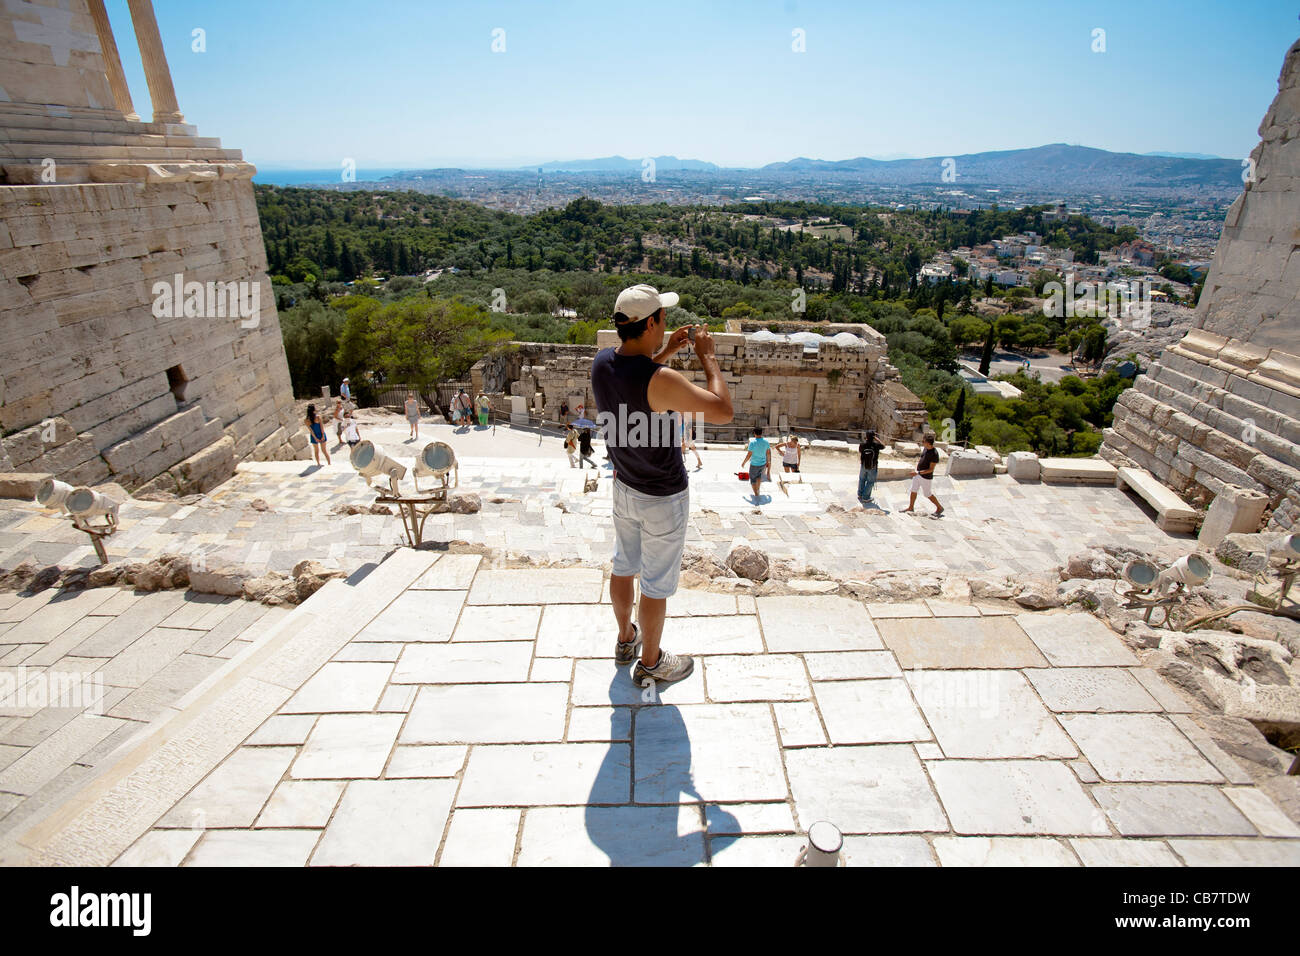 Travel and architecture shots from Greece - A tourist taking a photograph at the Akropolis entrance Stock Photo